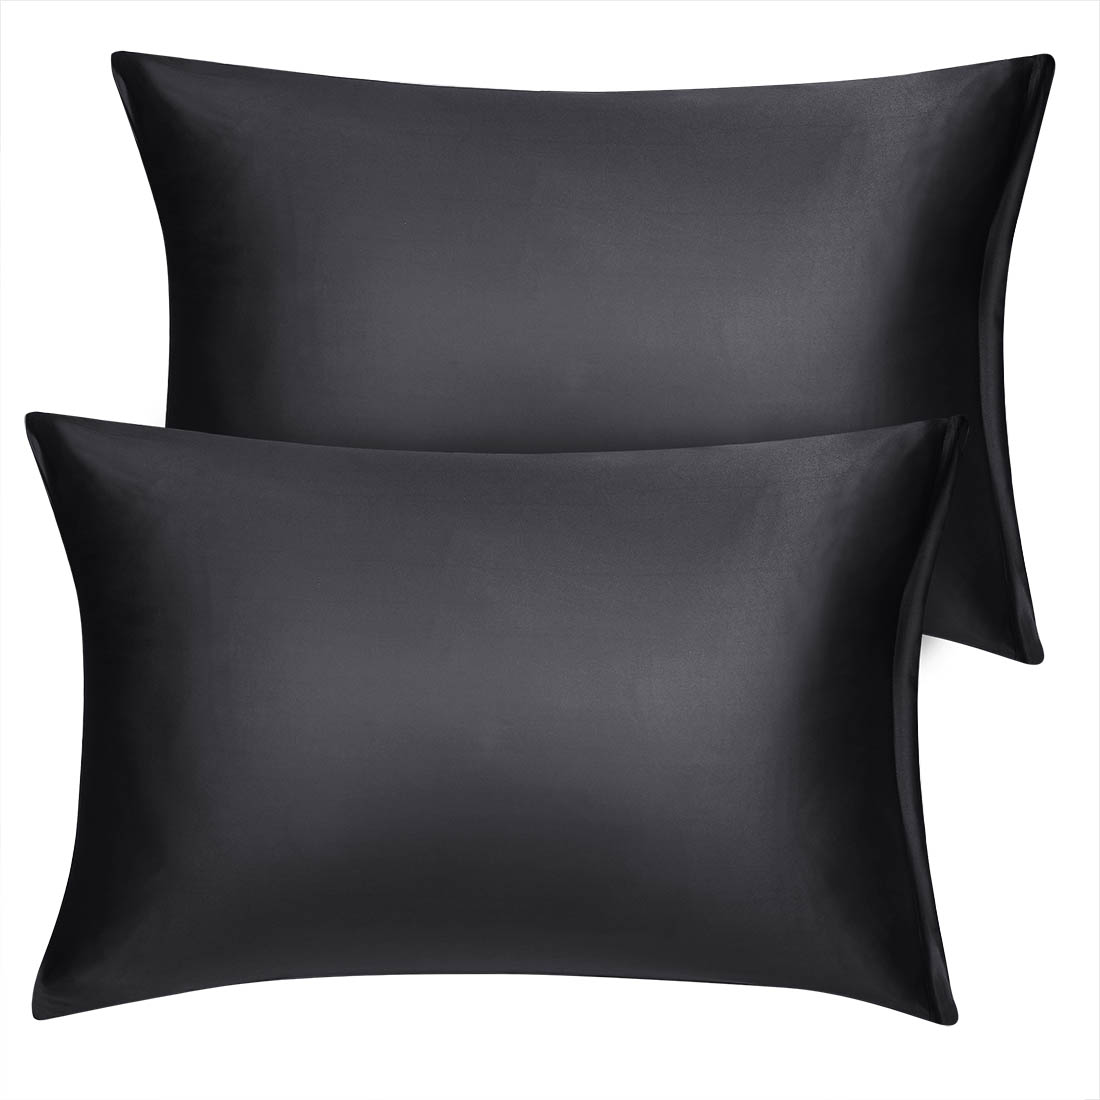 Unique Bargains Satin Pillowcase with Zipper, Super Soft and Luxury, Silky Pillow Cases Covers Set of 2